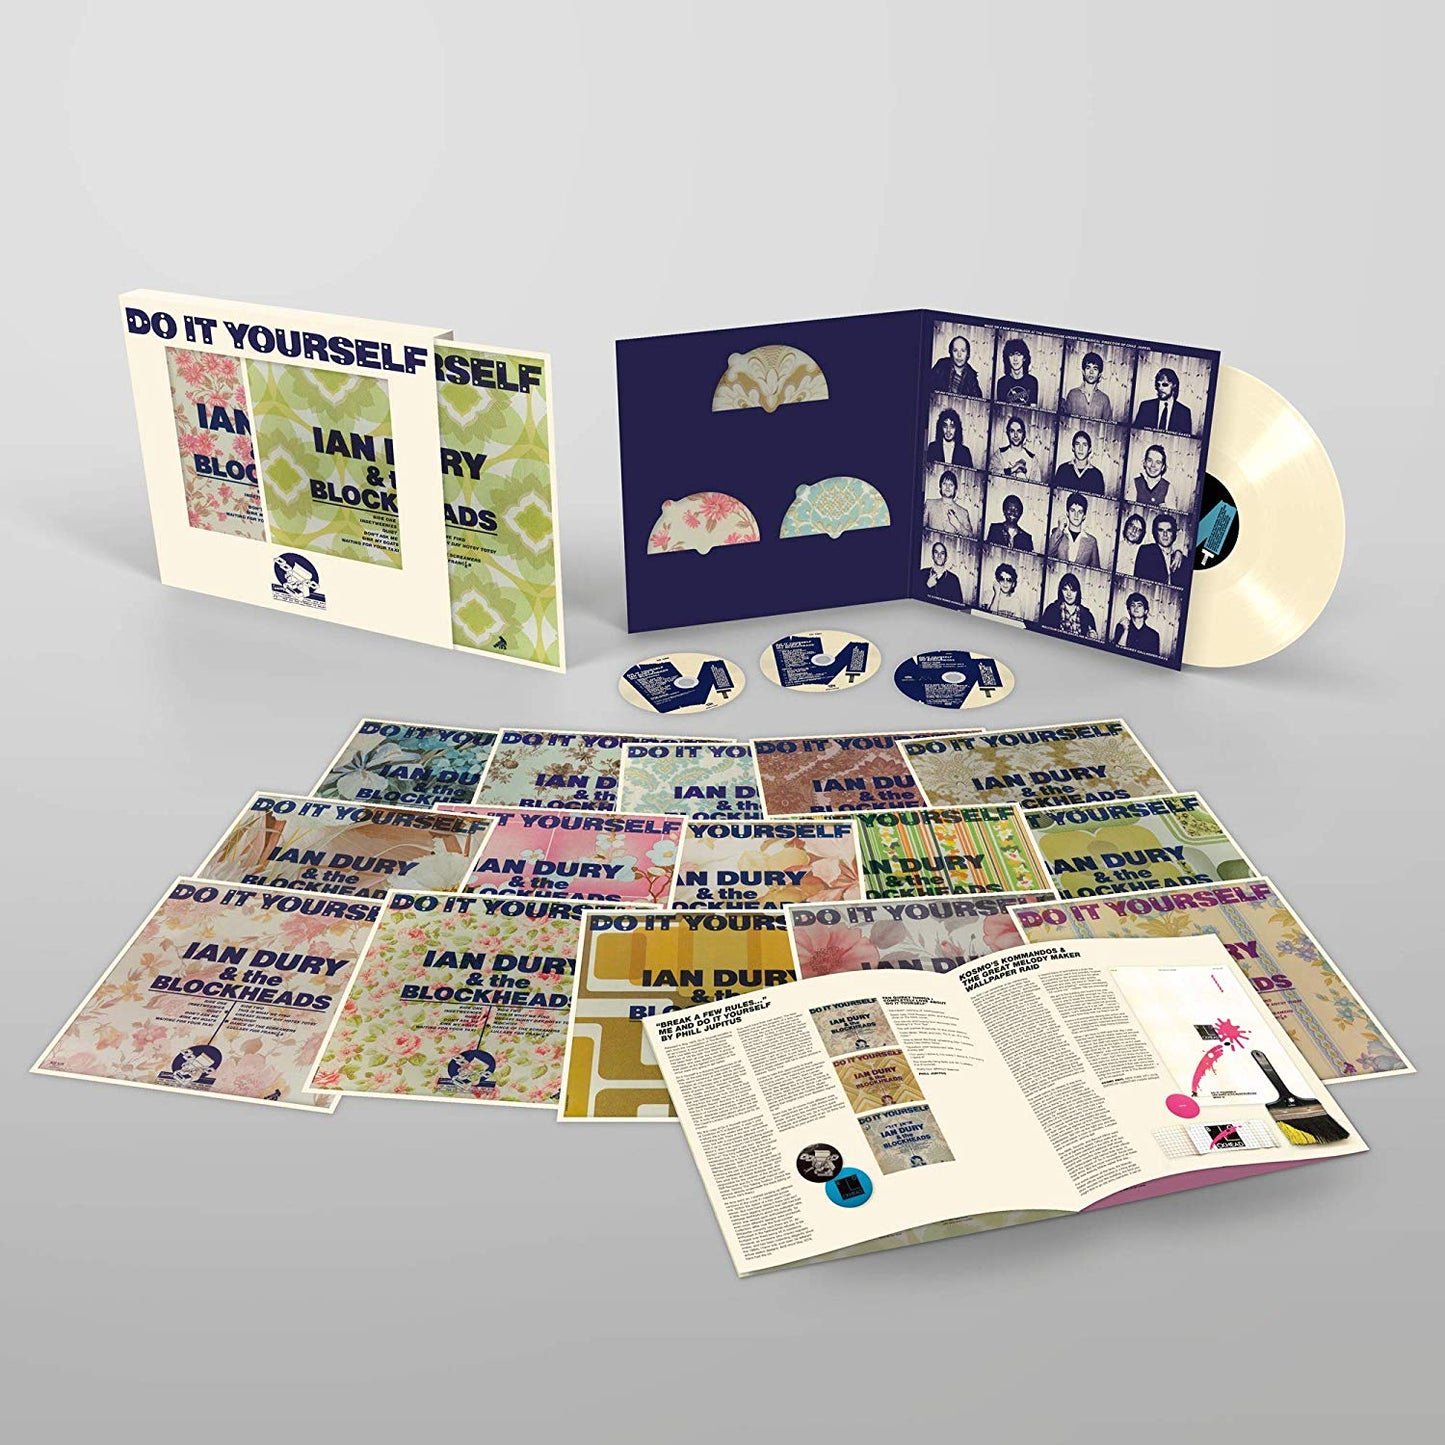 Ian Dury & the Blockheads / Do It Yourself 40th anniversary deluxe edition